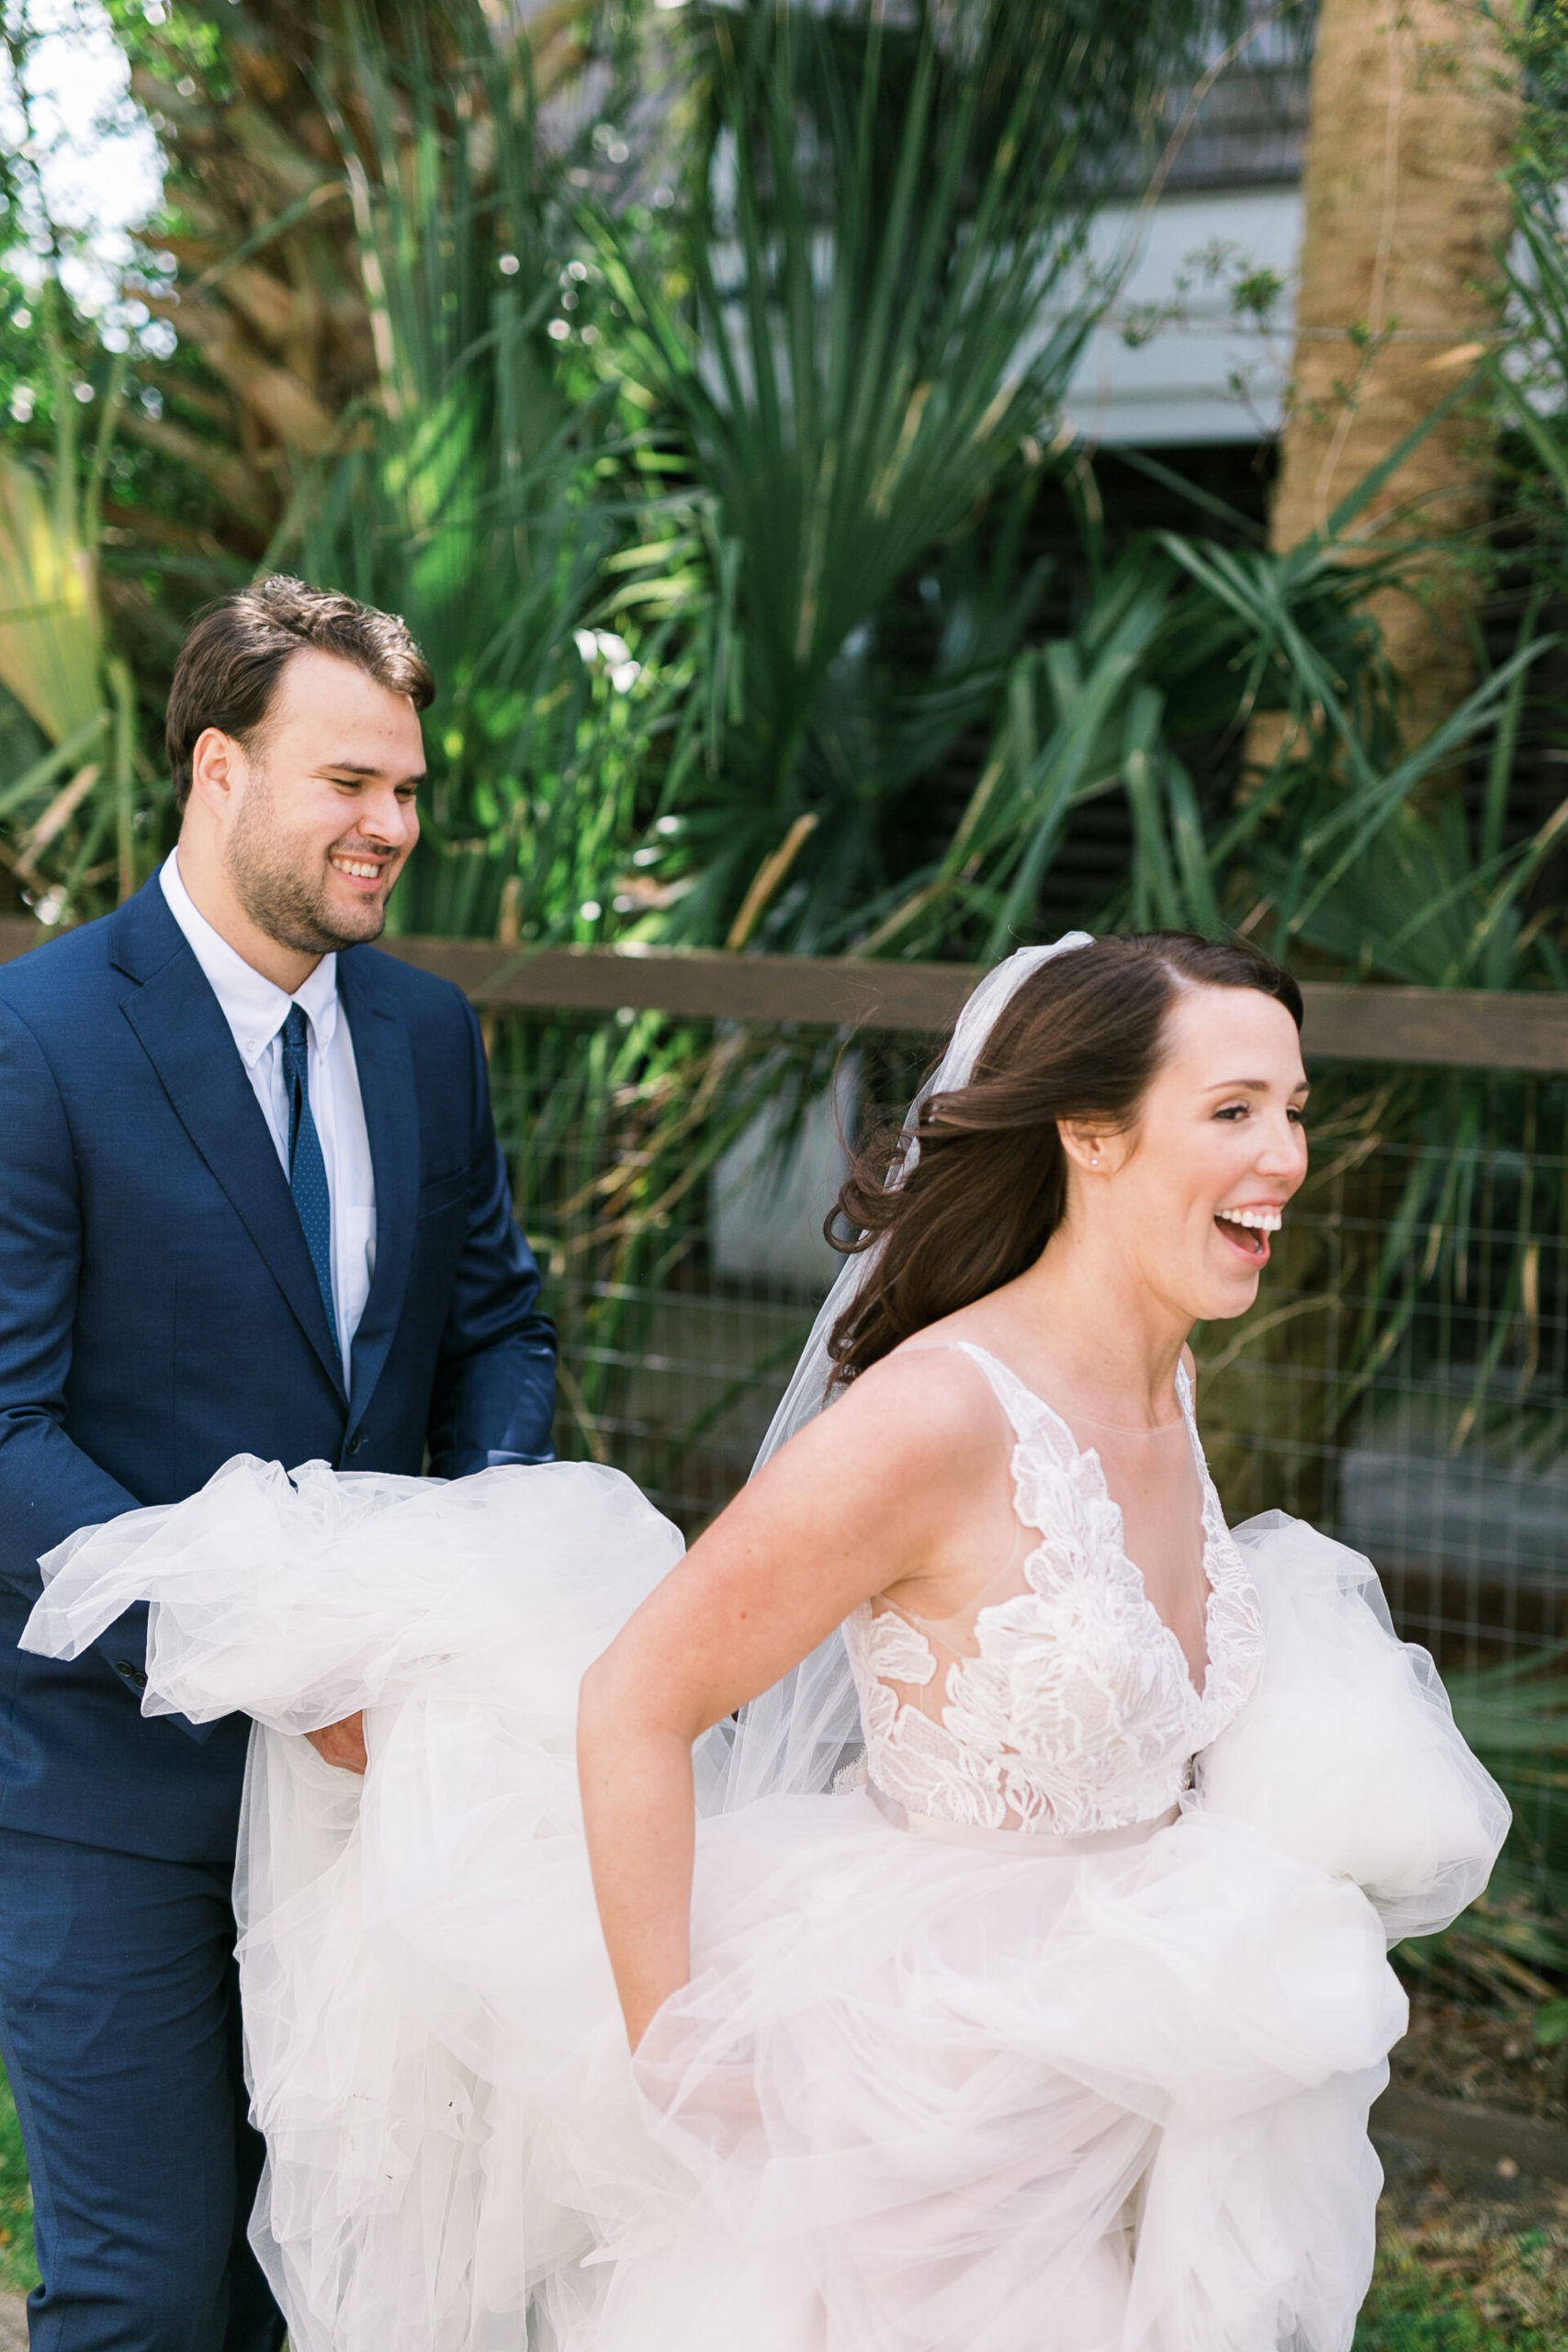 Candid bride and groom share a sweet moment helping the bride with her gorgeous wedding dress